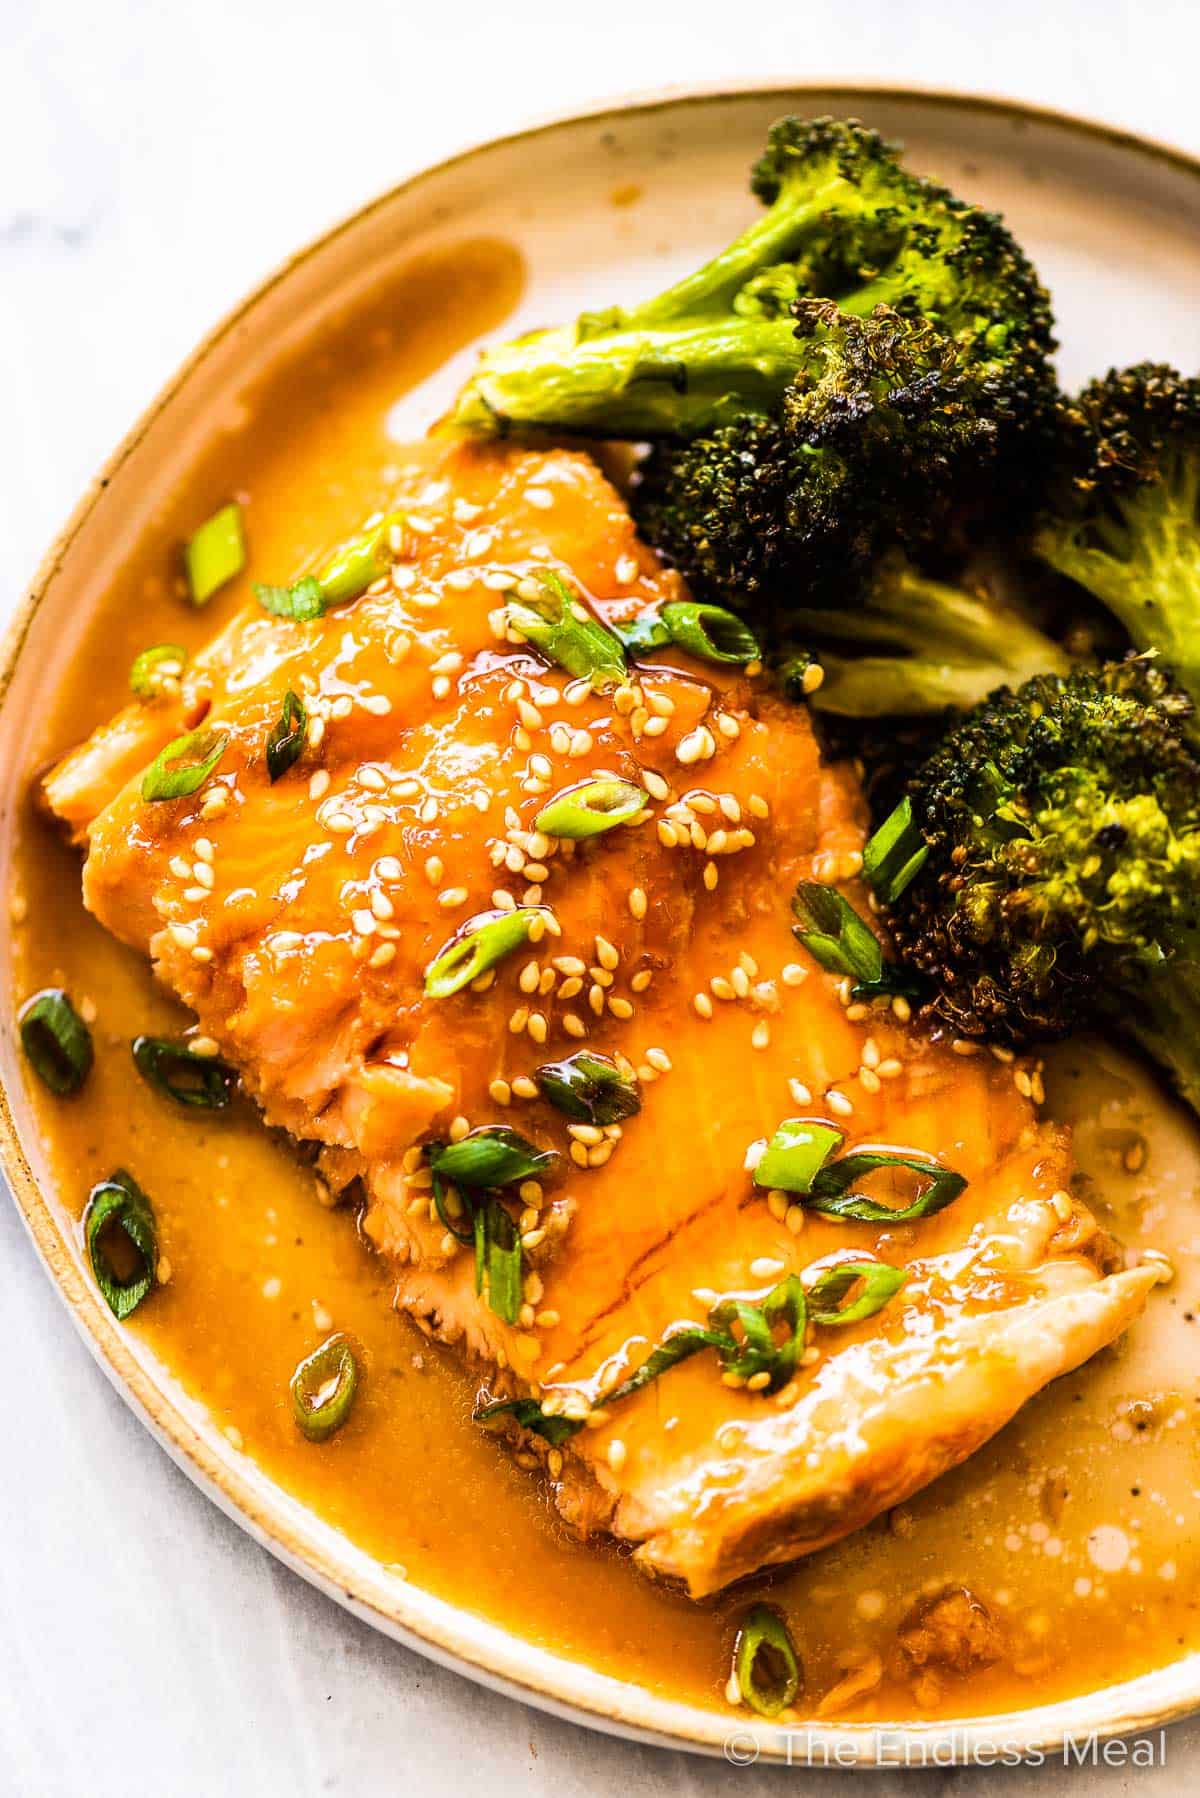 Glazed Asian salmon in a dinner plate with broccoli on the side/